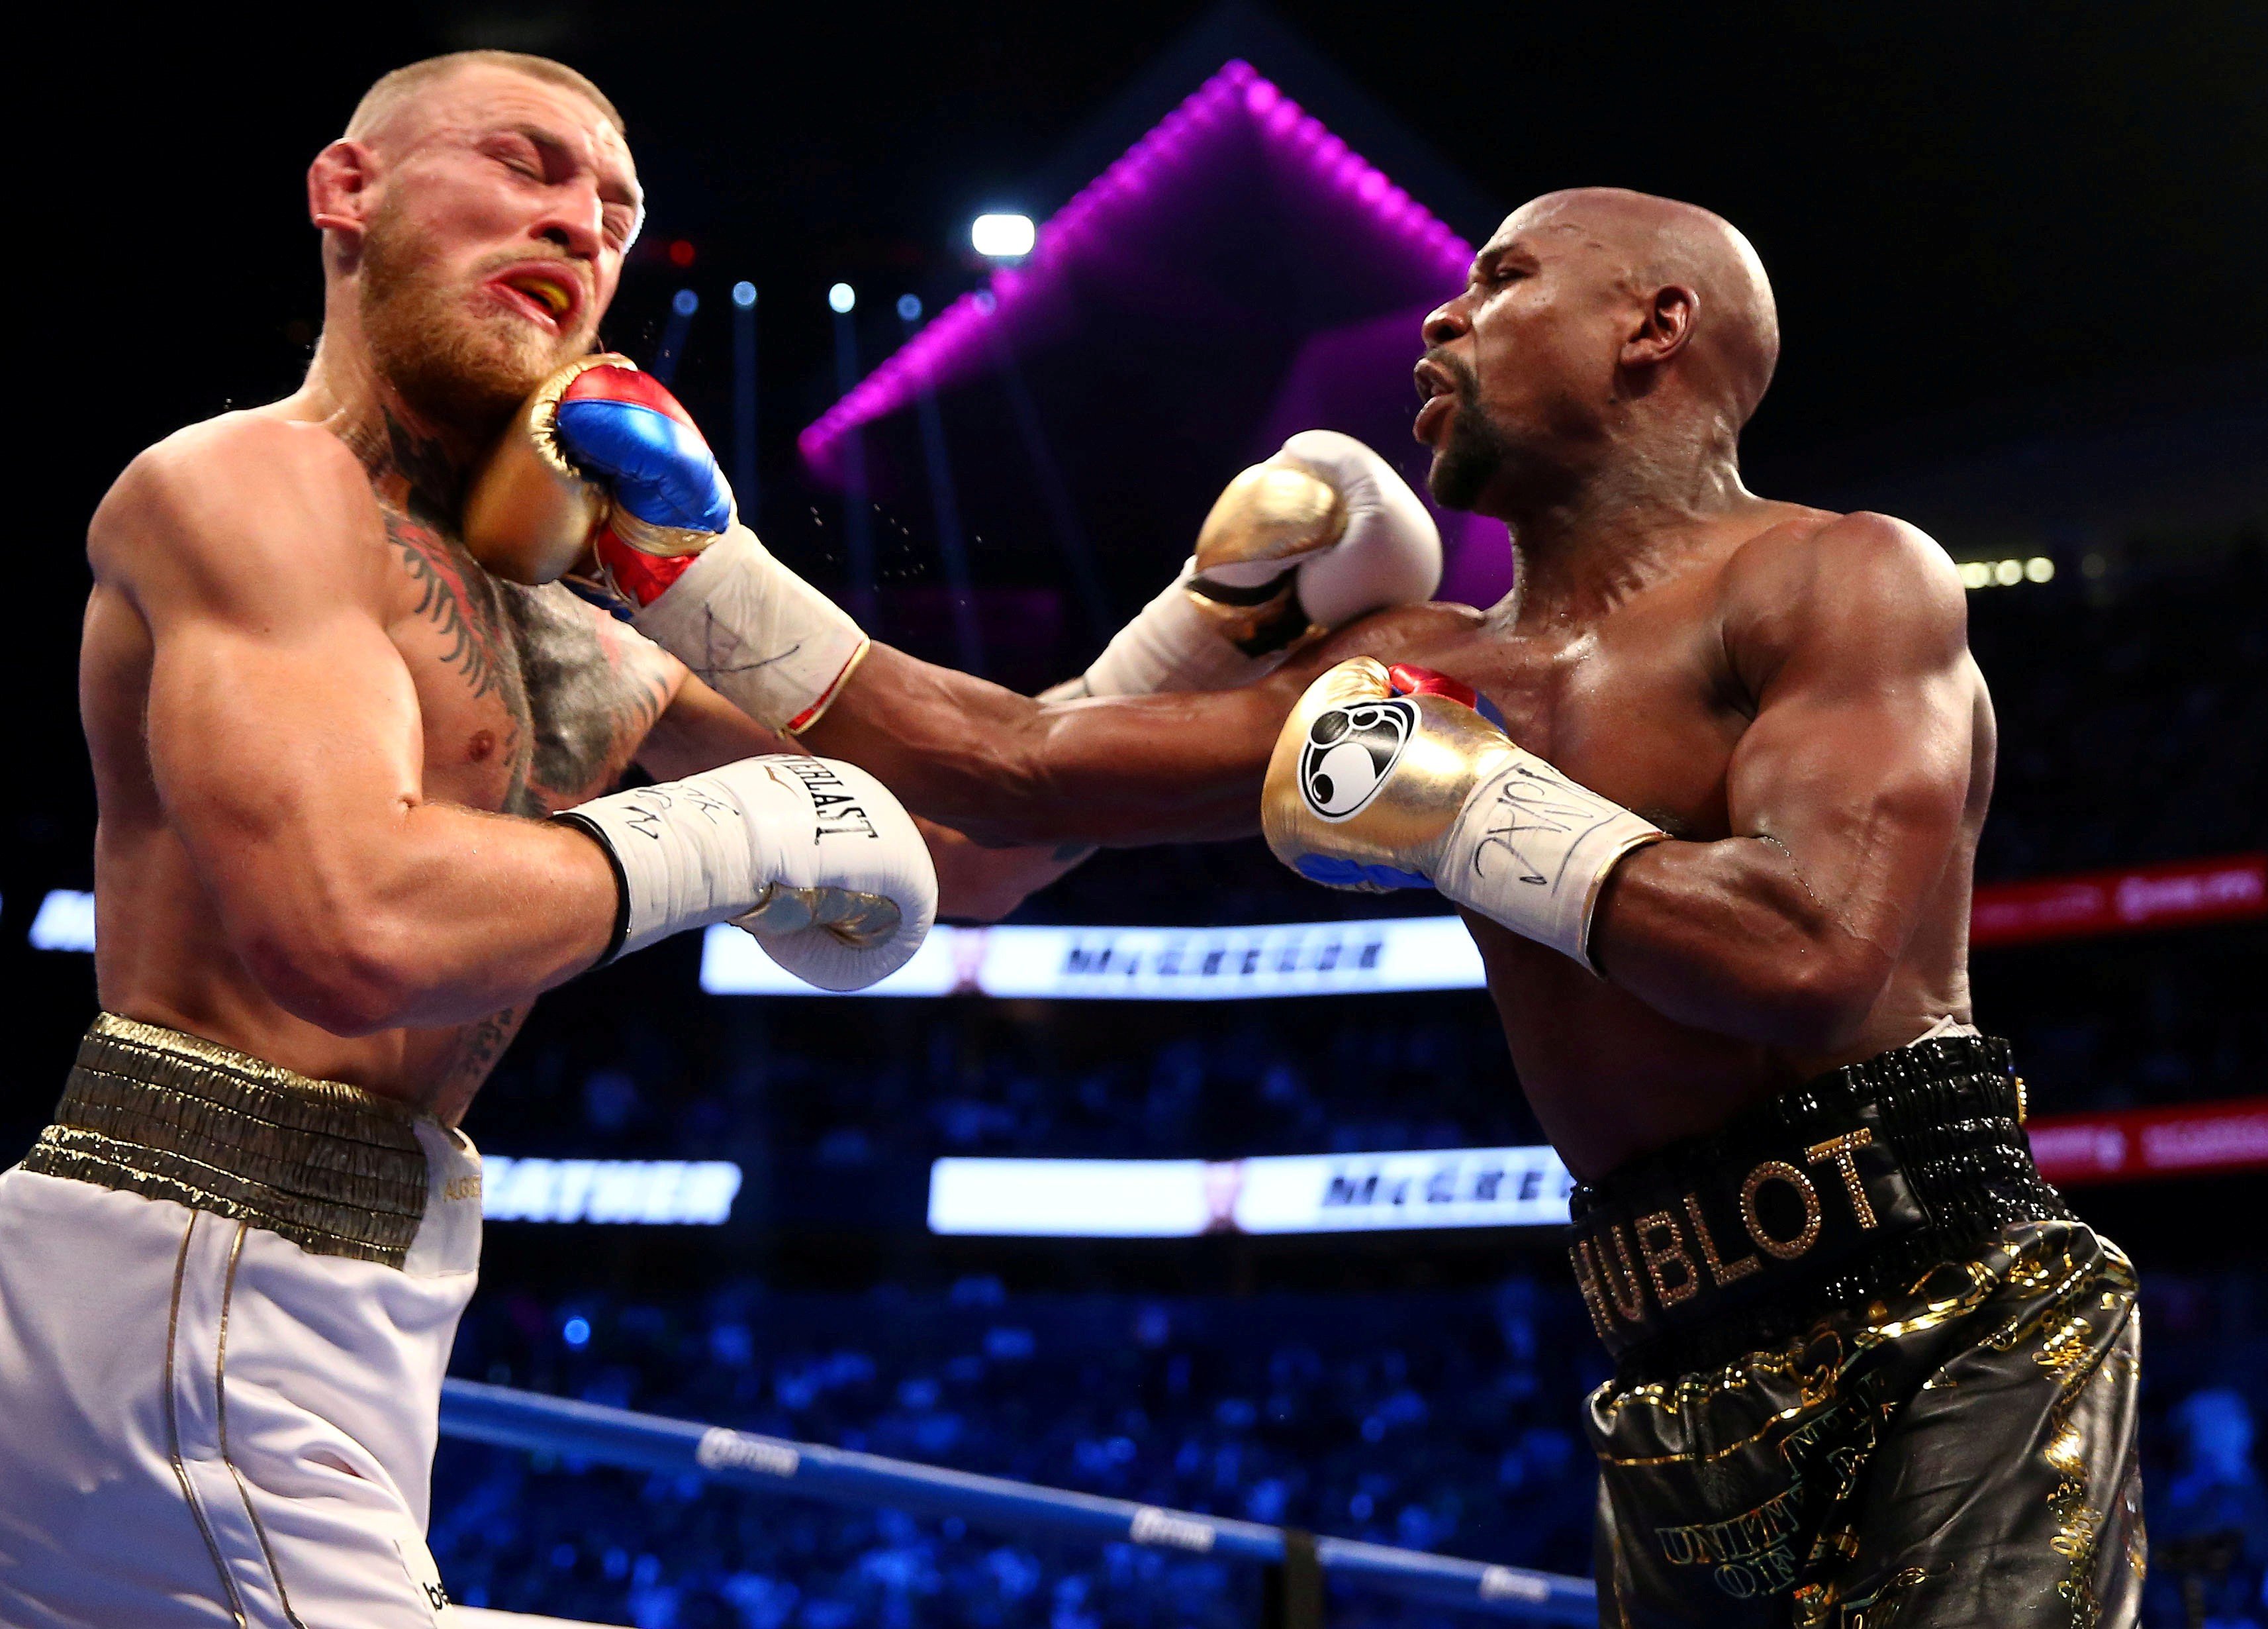 Floyd Mayweather Jnr (right) has been involved in the top three highest-grossing fights. Photo: USA TODAY Sports